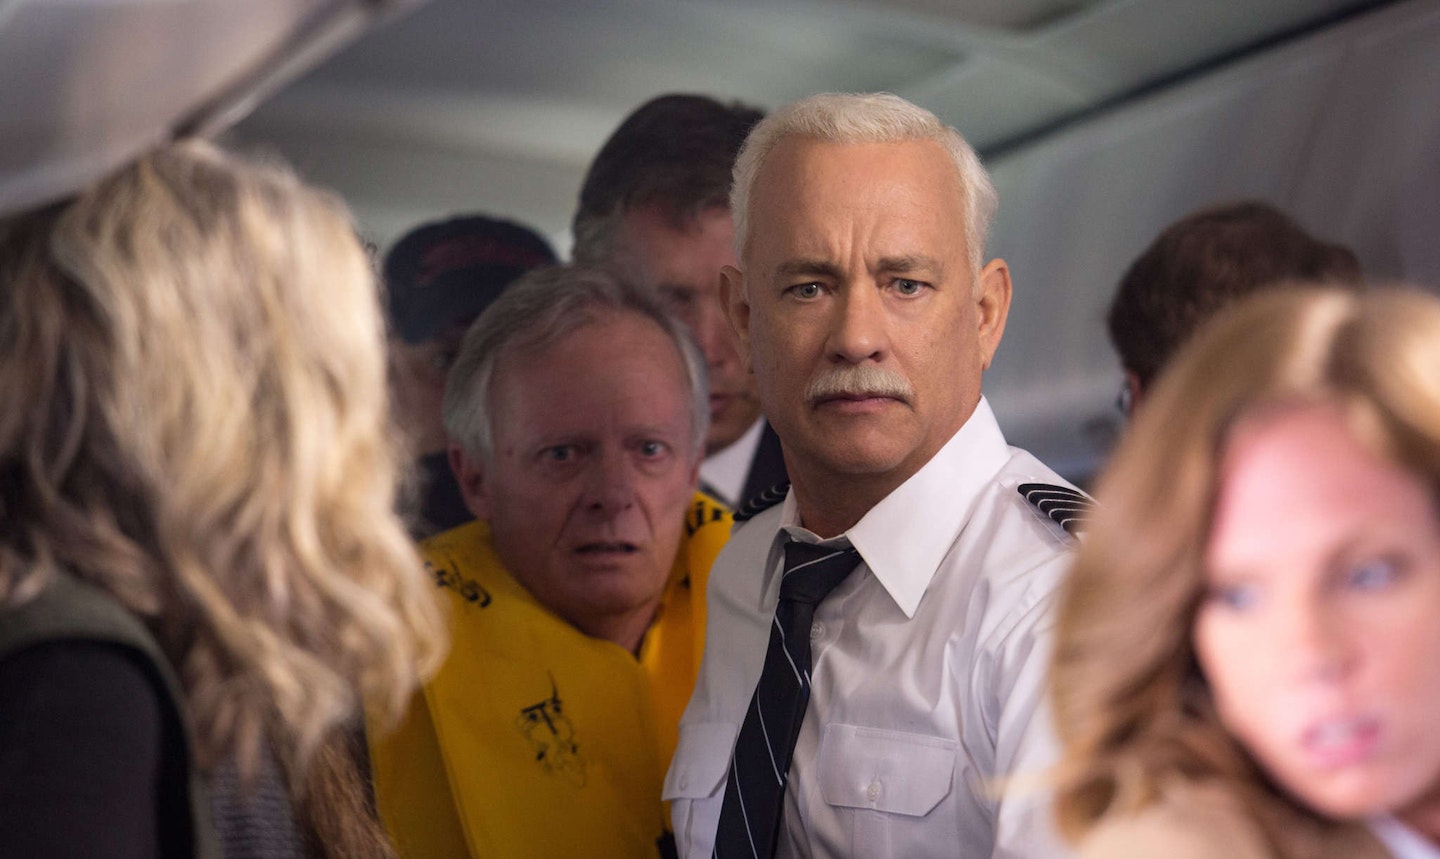 Tom Hanks in Clint Eastwood's Sully